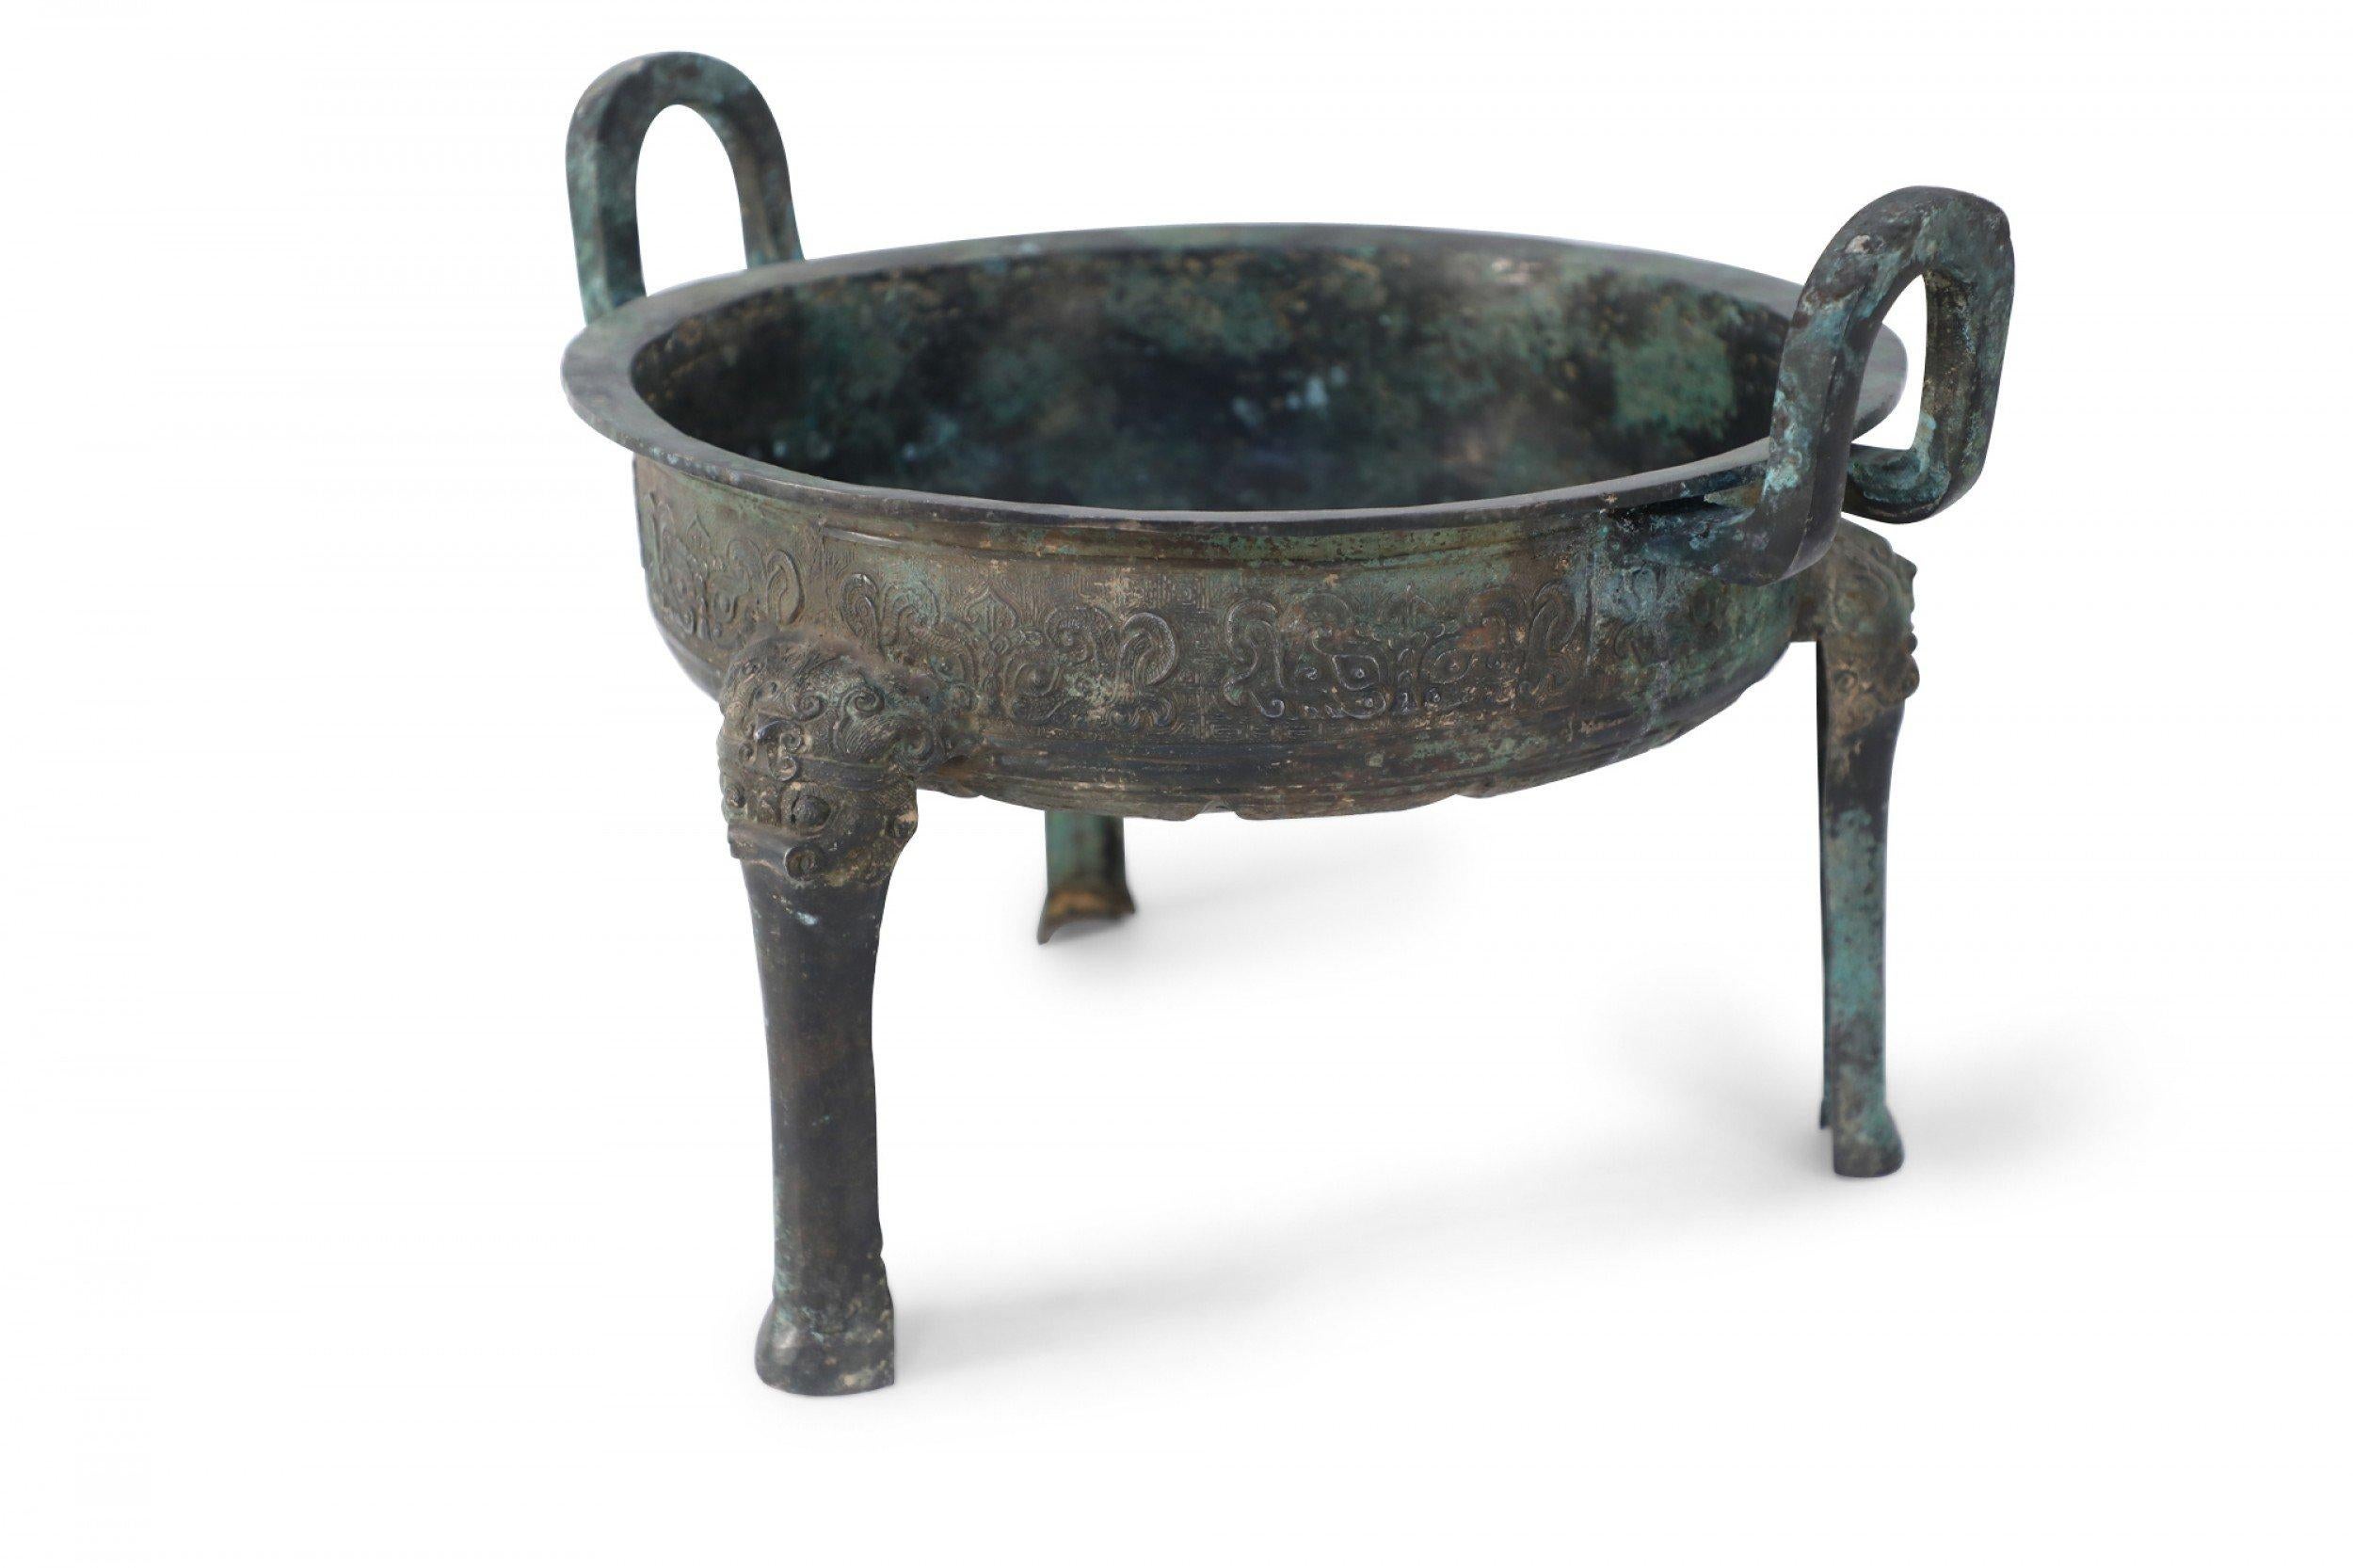 Antique Chinese Han Dynasty-style copy of a patinated bronze pot carved with raised geometric patterned bands wrapping its form, sitting atop three legs, and fitted with two upright handles.
  